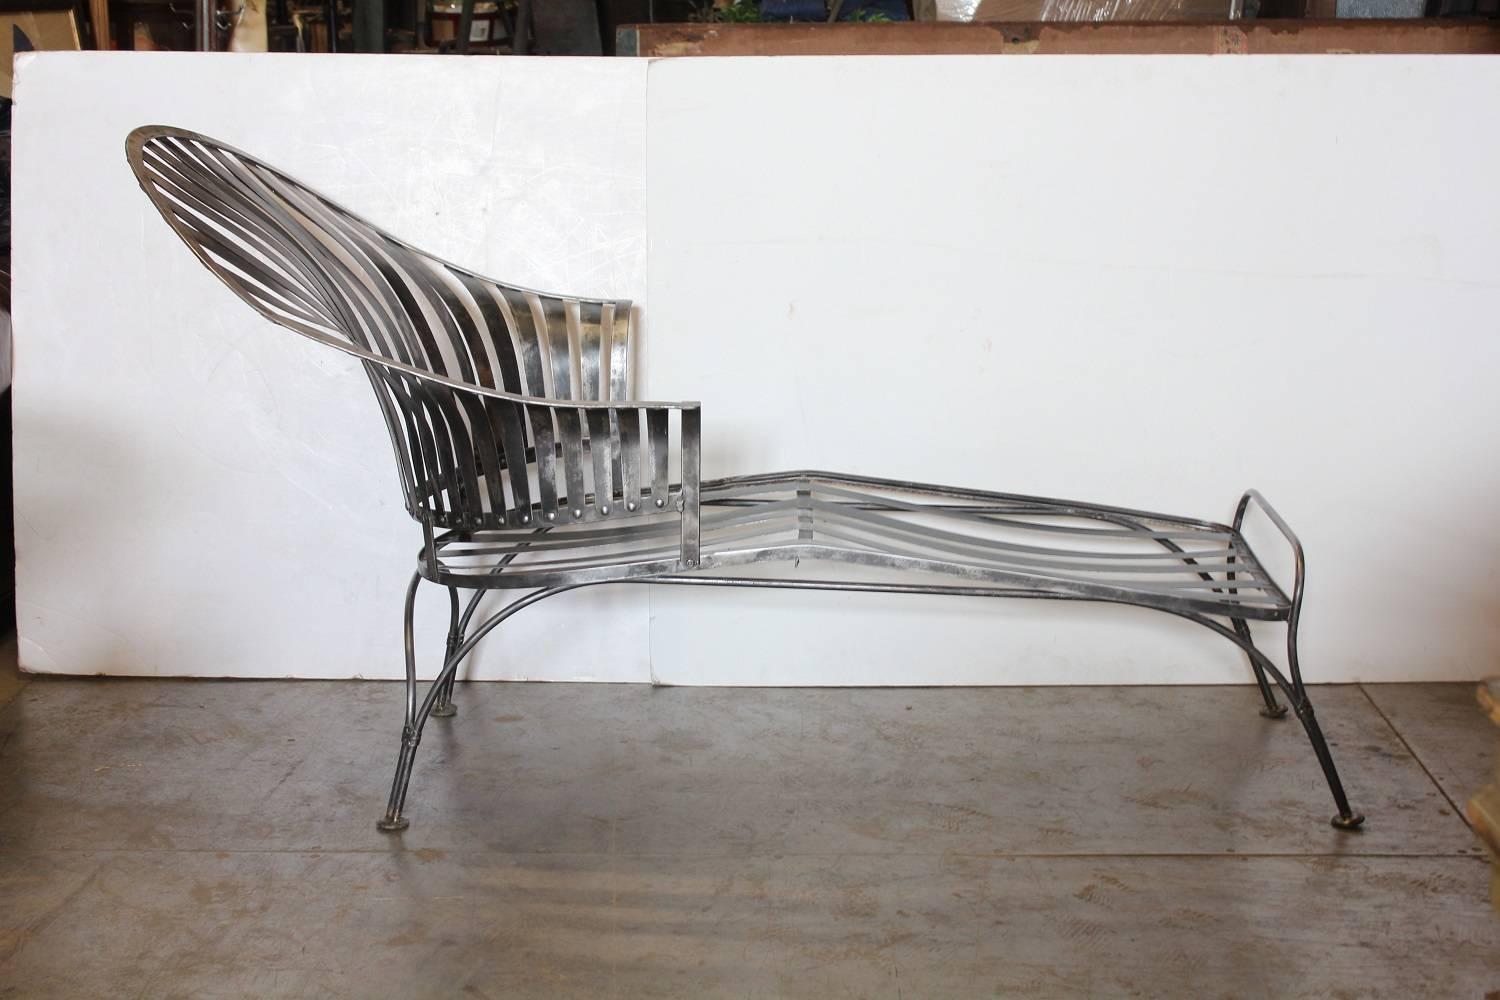 Midcentury metal chaise longue by Woodard. Recently refinished.